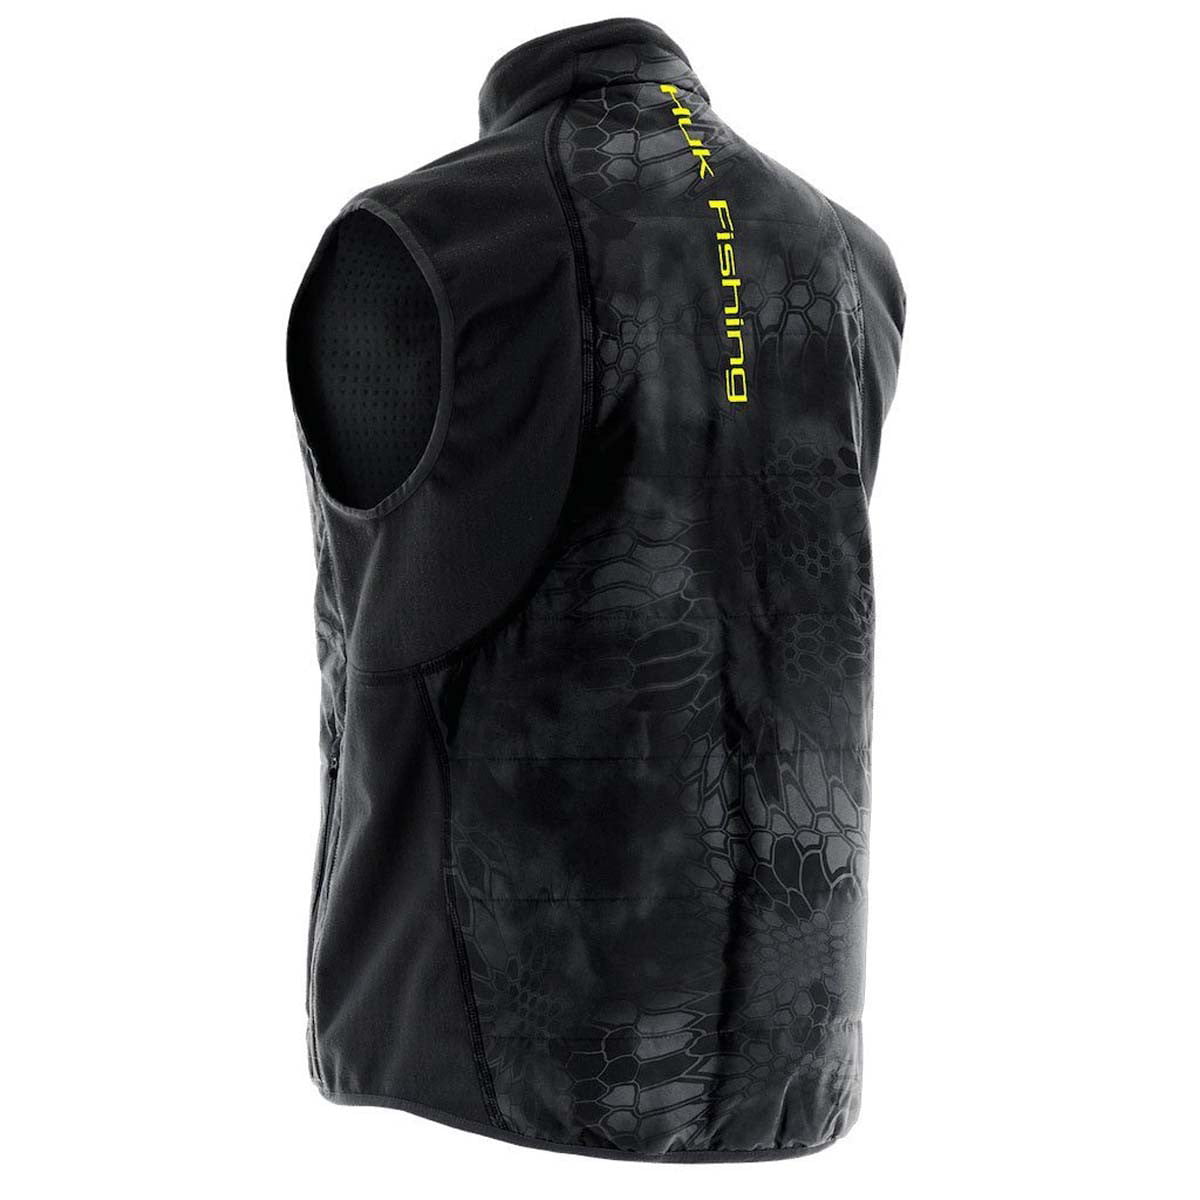 Size Small Huk Camo Teyra Vest H4000020070S Retail $119.99 